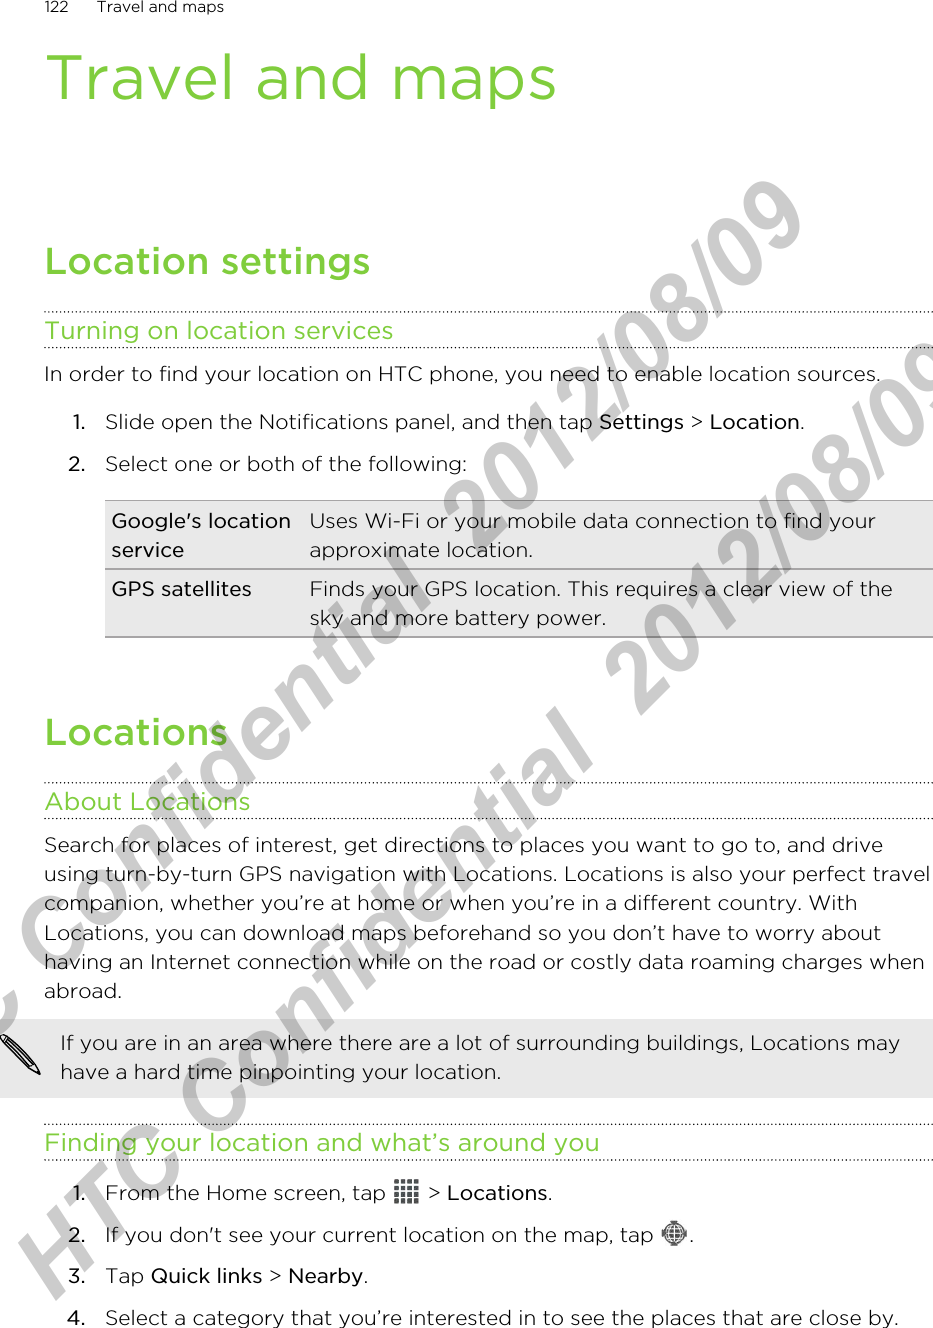 Travel and mapsLocation settingsTurning on location servicesIn order to find your location on HTC phone, you need to enable location sources.1. Slide open the Notifications panel, and then tap Settings &gt; Location.2. Select one or both of the following:Google&apos;s locationserviceUses Wi-Fi or your mobile data connection to find yourapproximate location.GPS satellites Finds your GPS location. This requires a clear view of thesky and more battery power.LocationsAbout LocationsSearch for places of interest, get directions to places you want to go to, and driveusing turn-by-turn GPS navigation with Locations. Locations is also your perfect travelcompanion, whether you’re at home or when you’re in a different country. WithLocations, you can download maps beforehand so you don’t have to worry abouthaving an Internet connection while on the road or costly data roaming charges whenabroad.If you are in an area where there are a lot of surrounding buildings, Locations mayhave a hard time pinpointing your location.Finding your location and what’s around you1. From the Home screen, tap   &gt; Locations.2. If you don&apos;t see your current location on the map, tap  .3. Tap Quick links &gt; Nearby.4. Select a category that you’re interested in to see the places that are close by.122 Travel and mapsHTC Confidential  2012/08/09  HTC Confidential  2012/08/09 